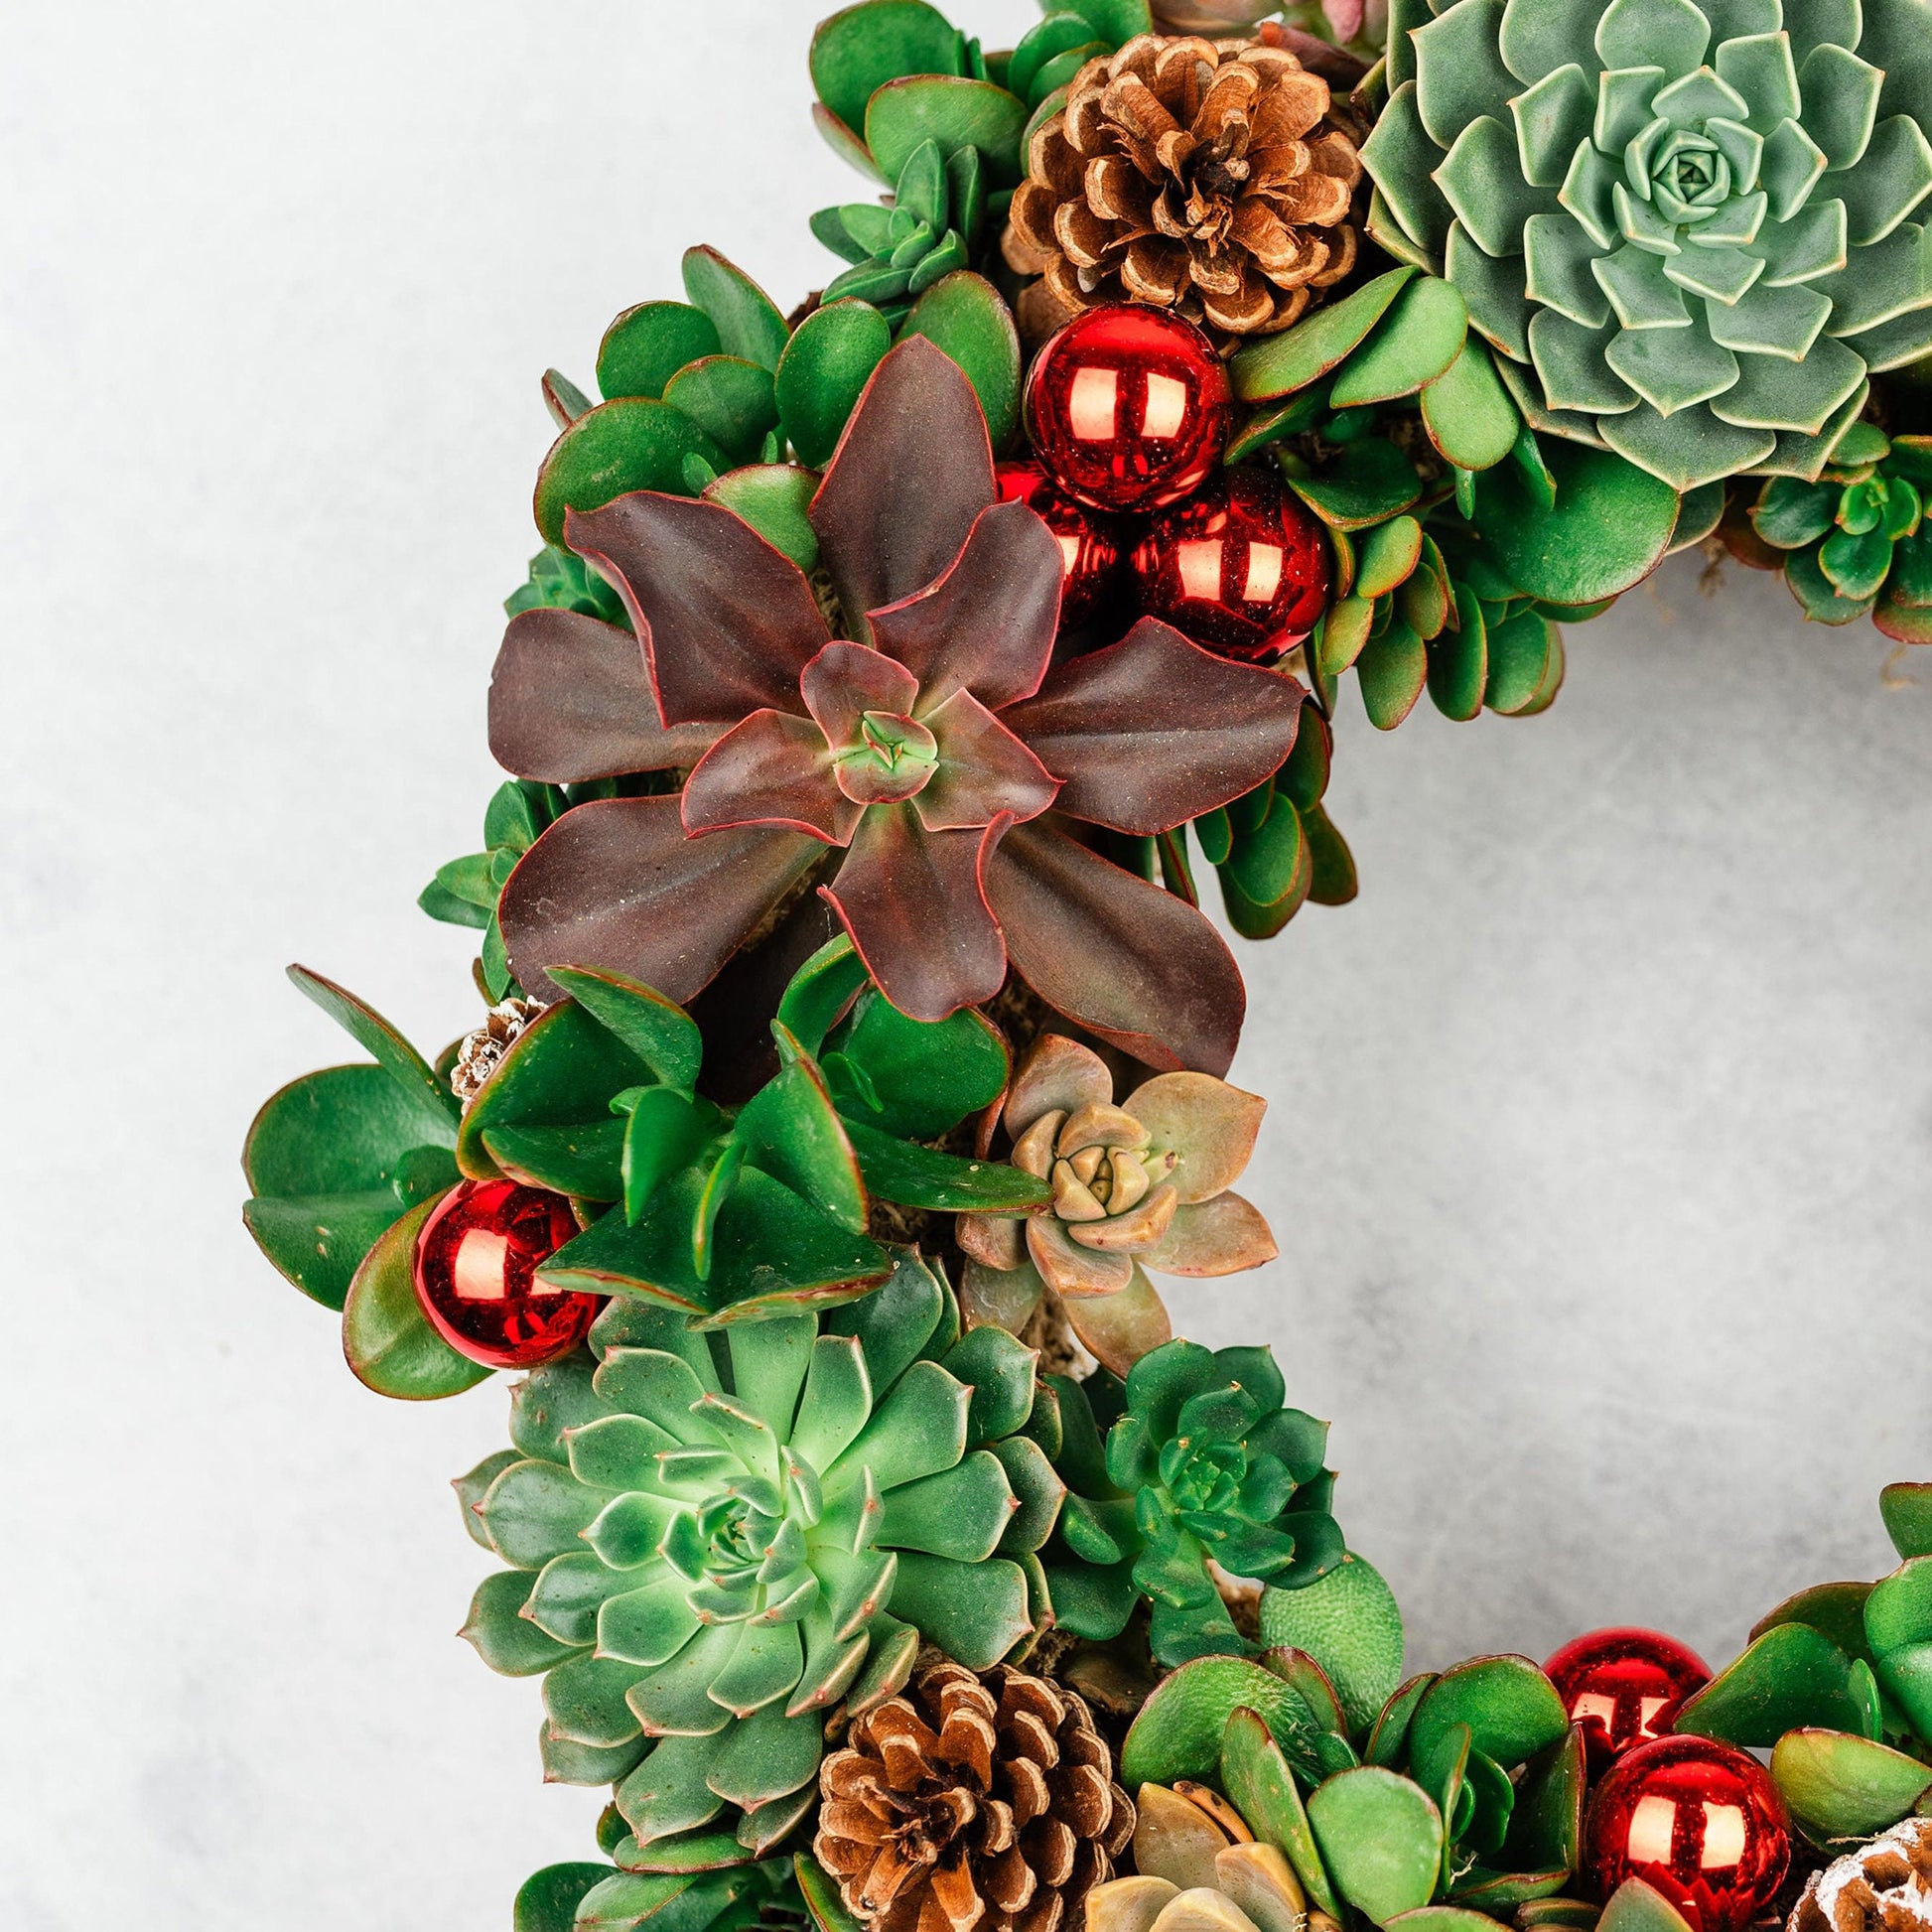 Christmas Succulent Wreath with Living Green and Red Plants, Ornaments, and Pine Cones for Front Door Entry, Holiday Decorating